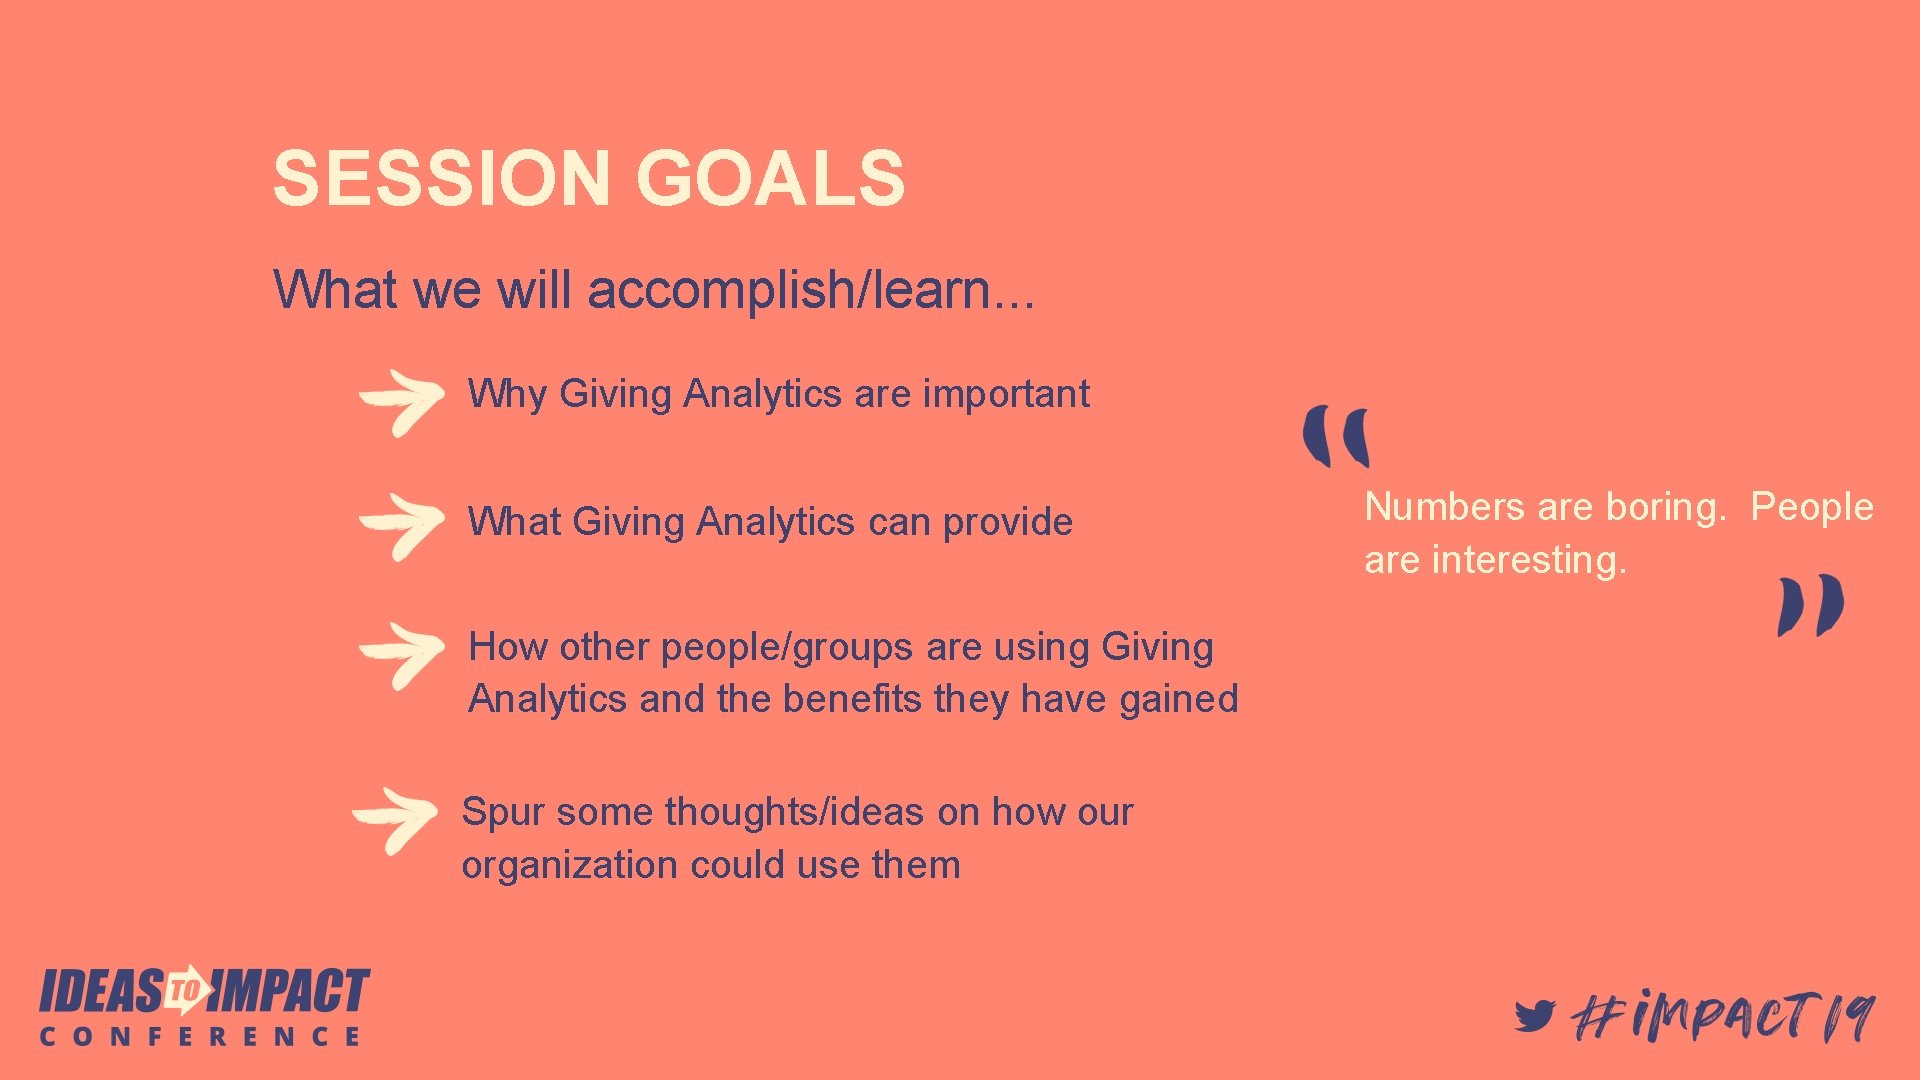 SESSION GOALS What we will accomplish/learn. . . Why Giving Analytics are important What